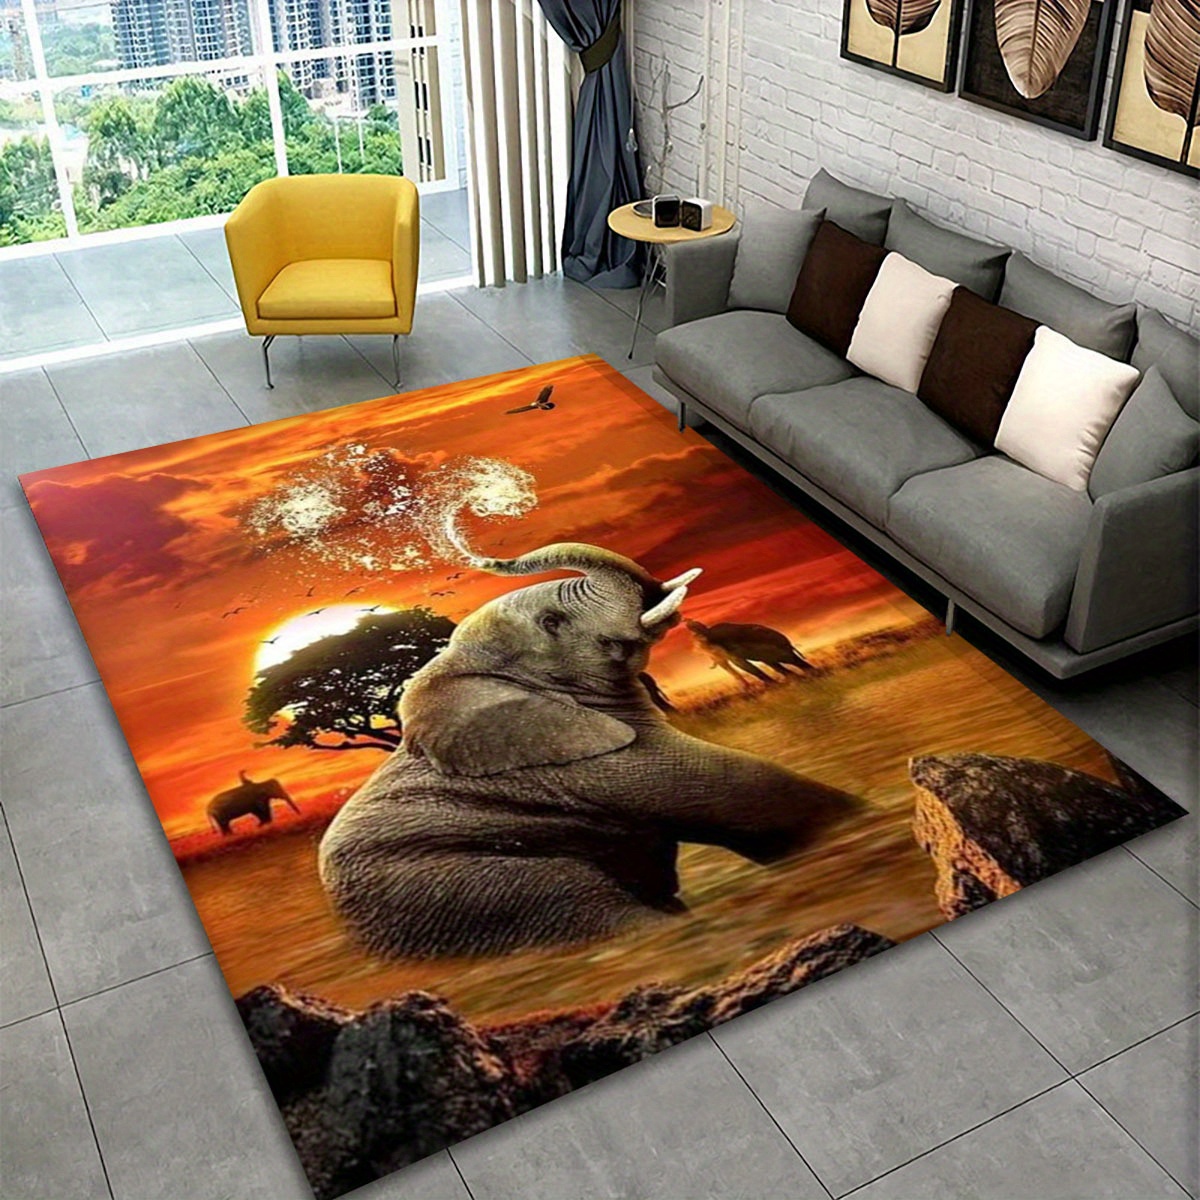 

Elephant Design Area Rug - Polyester Non-slip Absorbent Mat For Gaming, Bedroom & Outdoor, Hand Washable Comfort Home Decor Floor Carpet For Living Room And Bedroom, Durable Runner Yoga Mat